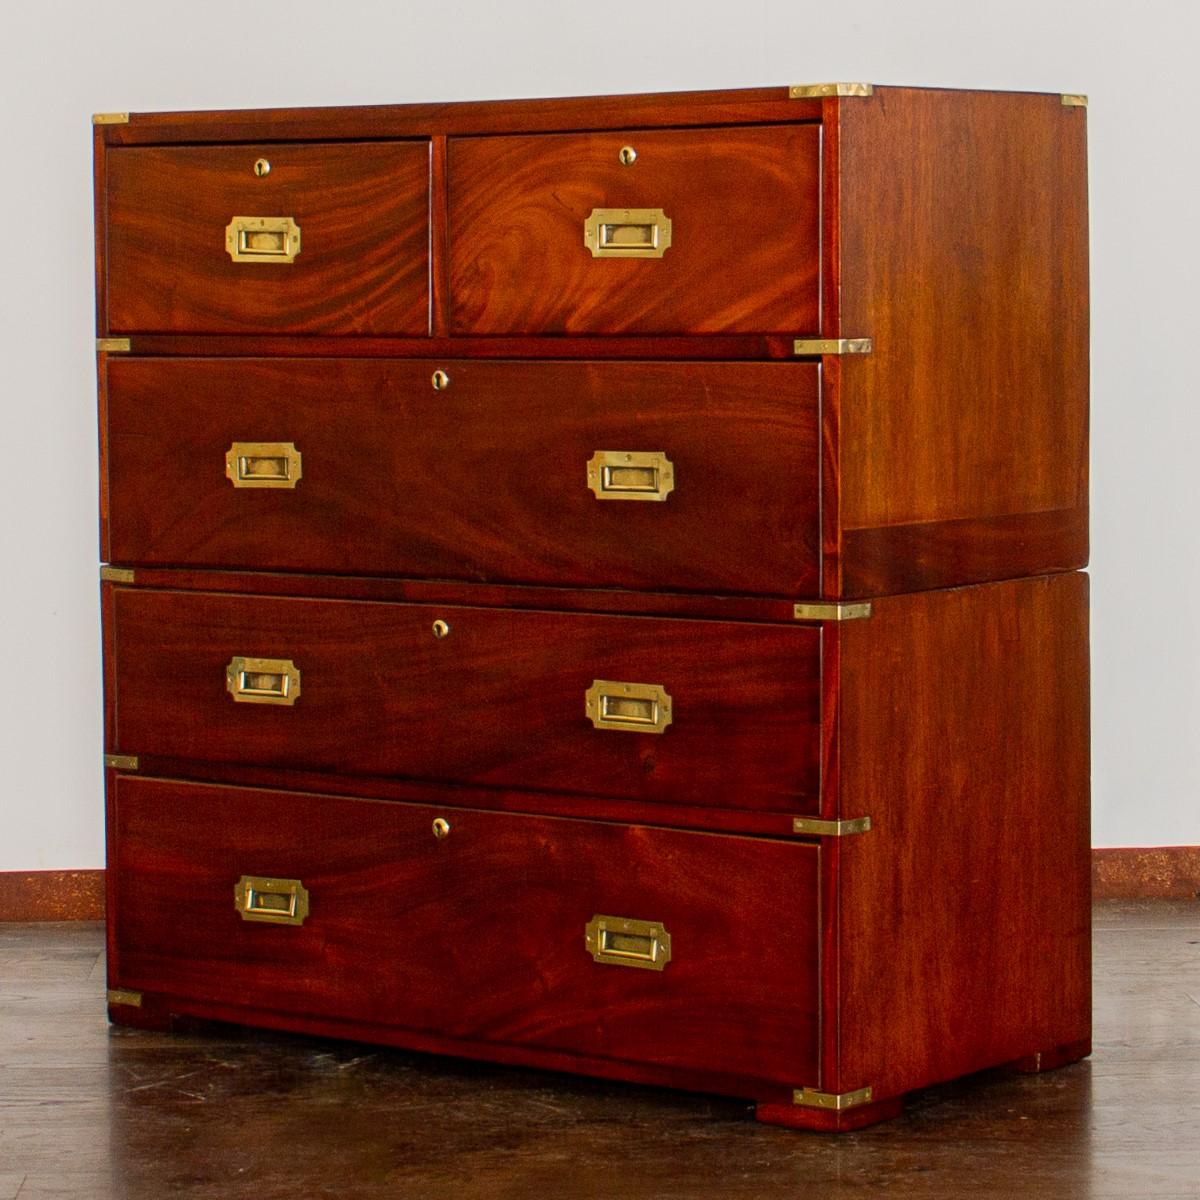 A 19th century Campaign chest with two short and three long drawers, furnished with original brass flush handles and carrying handles to the sides.  

Campaign or Military furniture was popular in the 19th and 20th centuries, when military